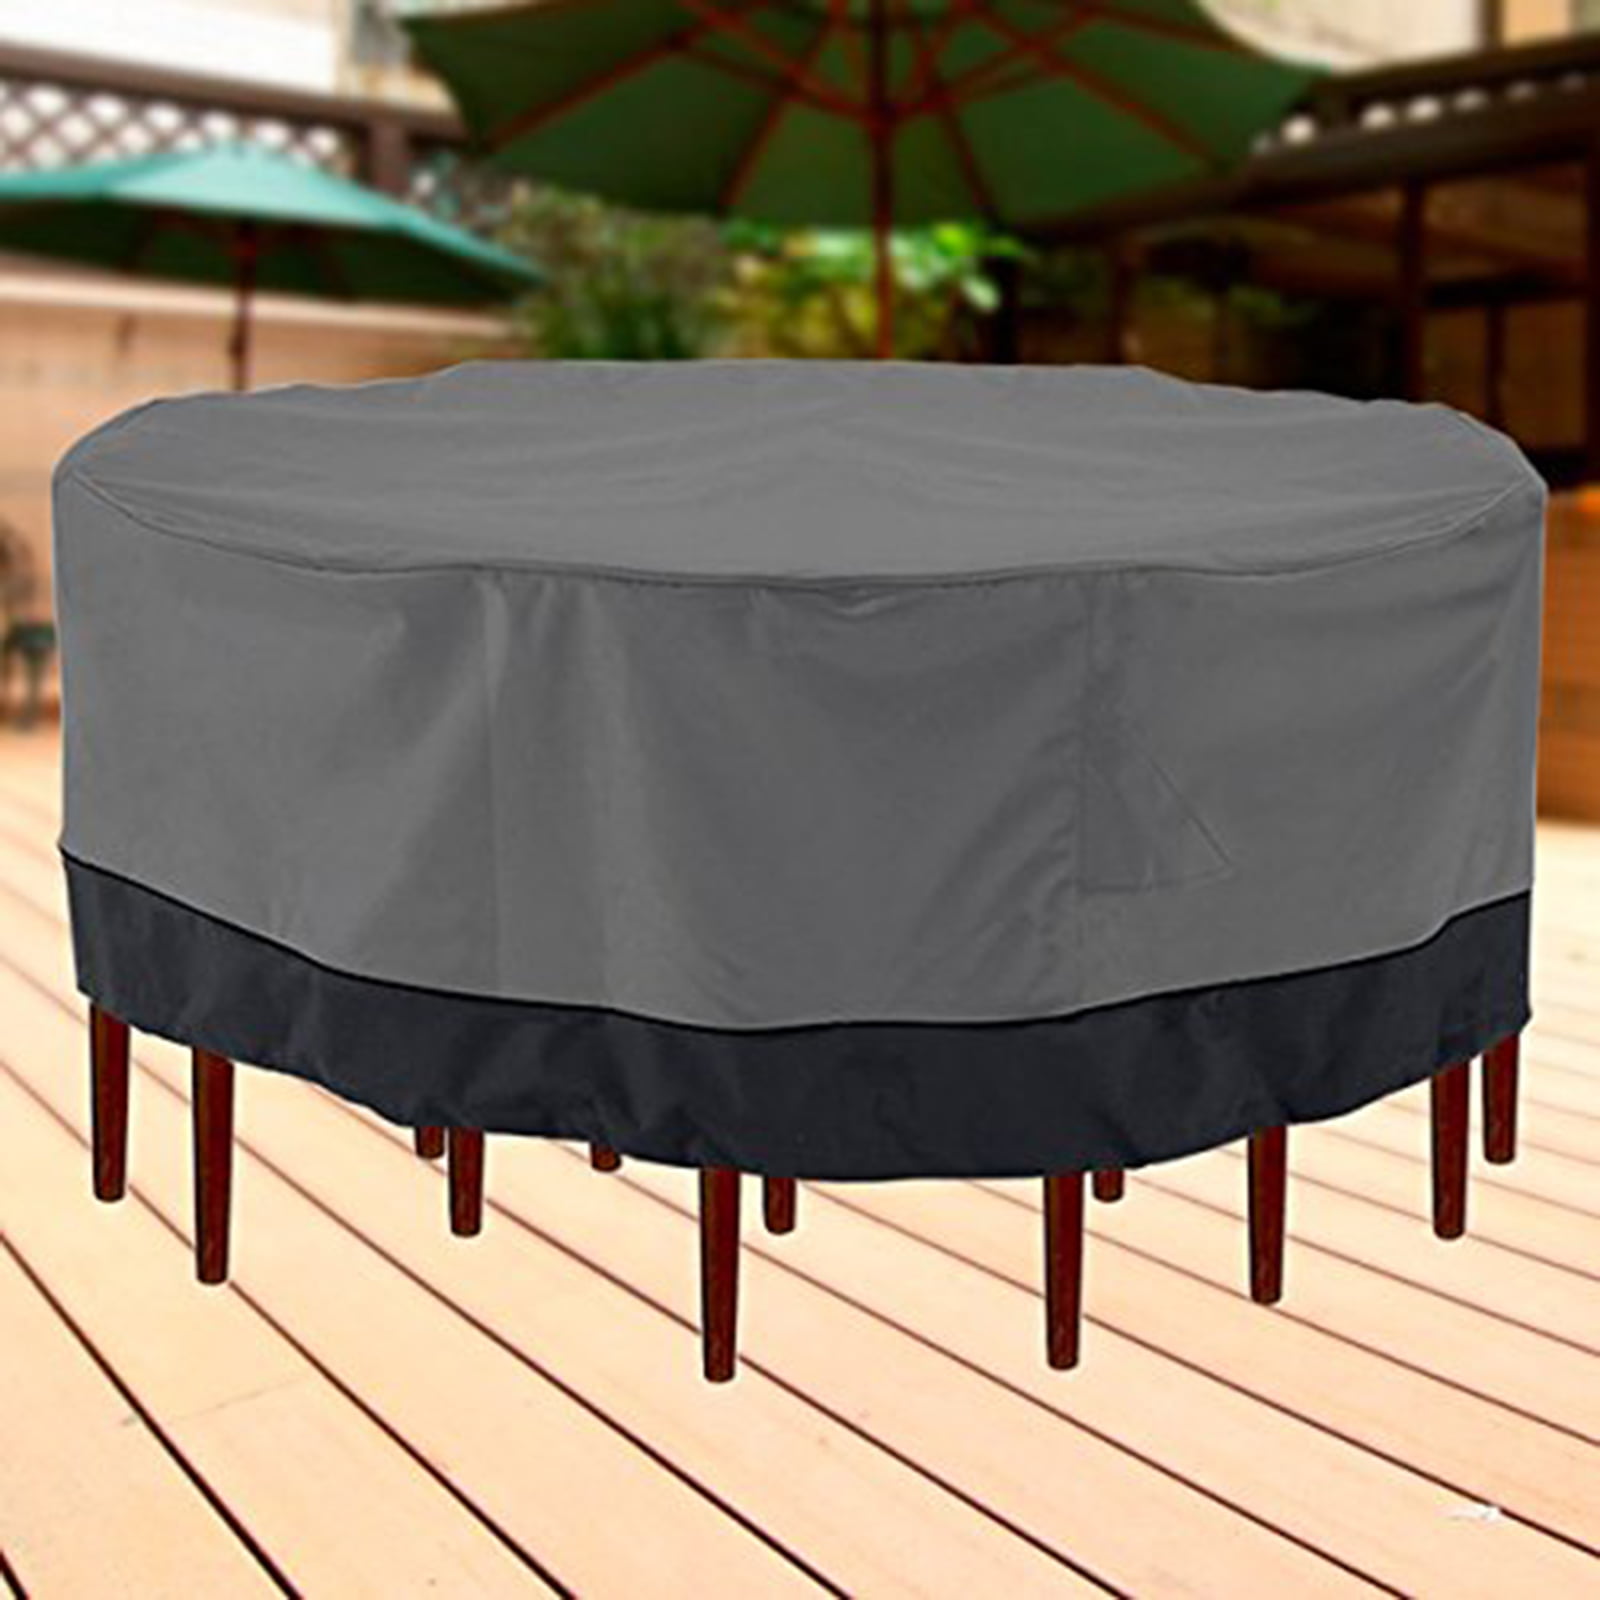 Outdoor Chair Covers Walmart - drwendesigns